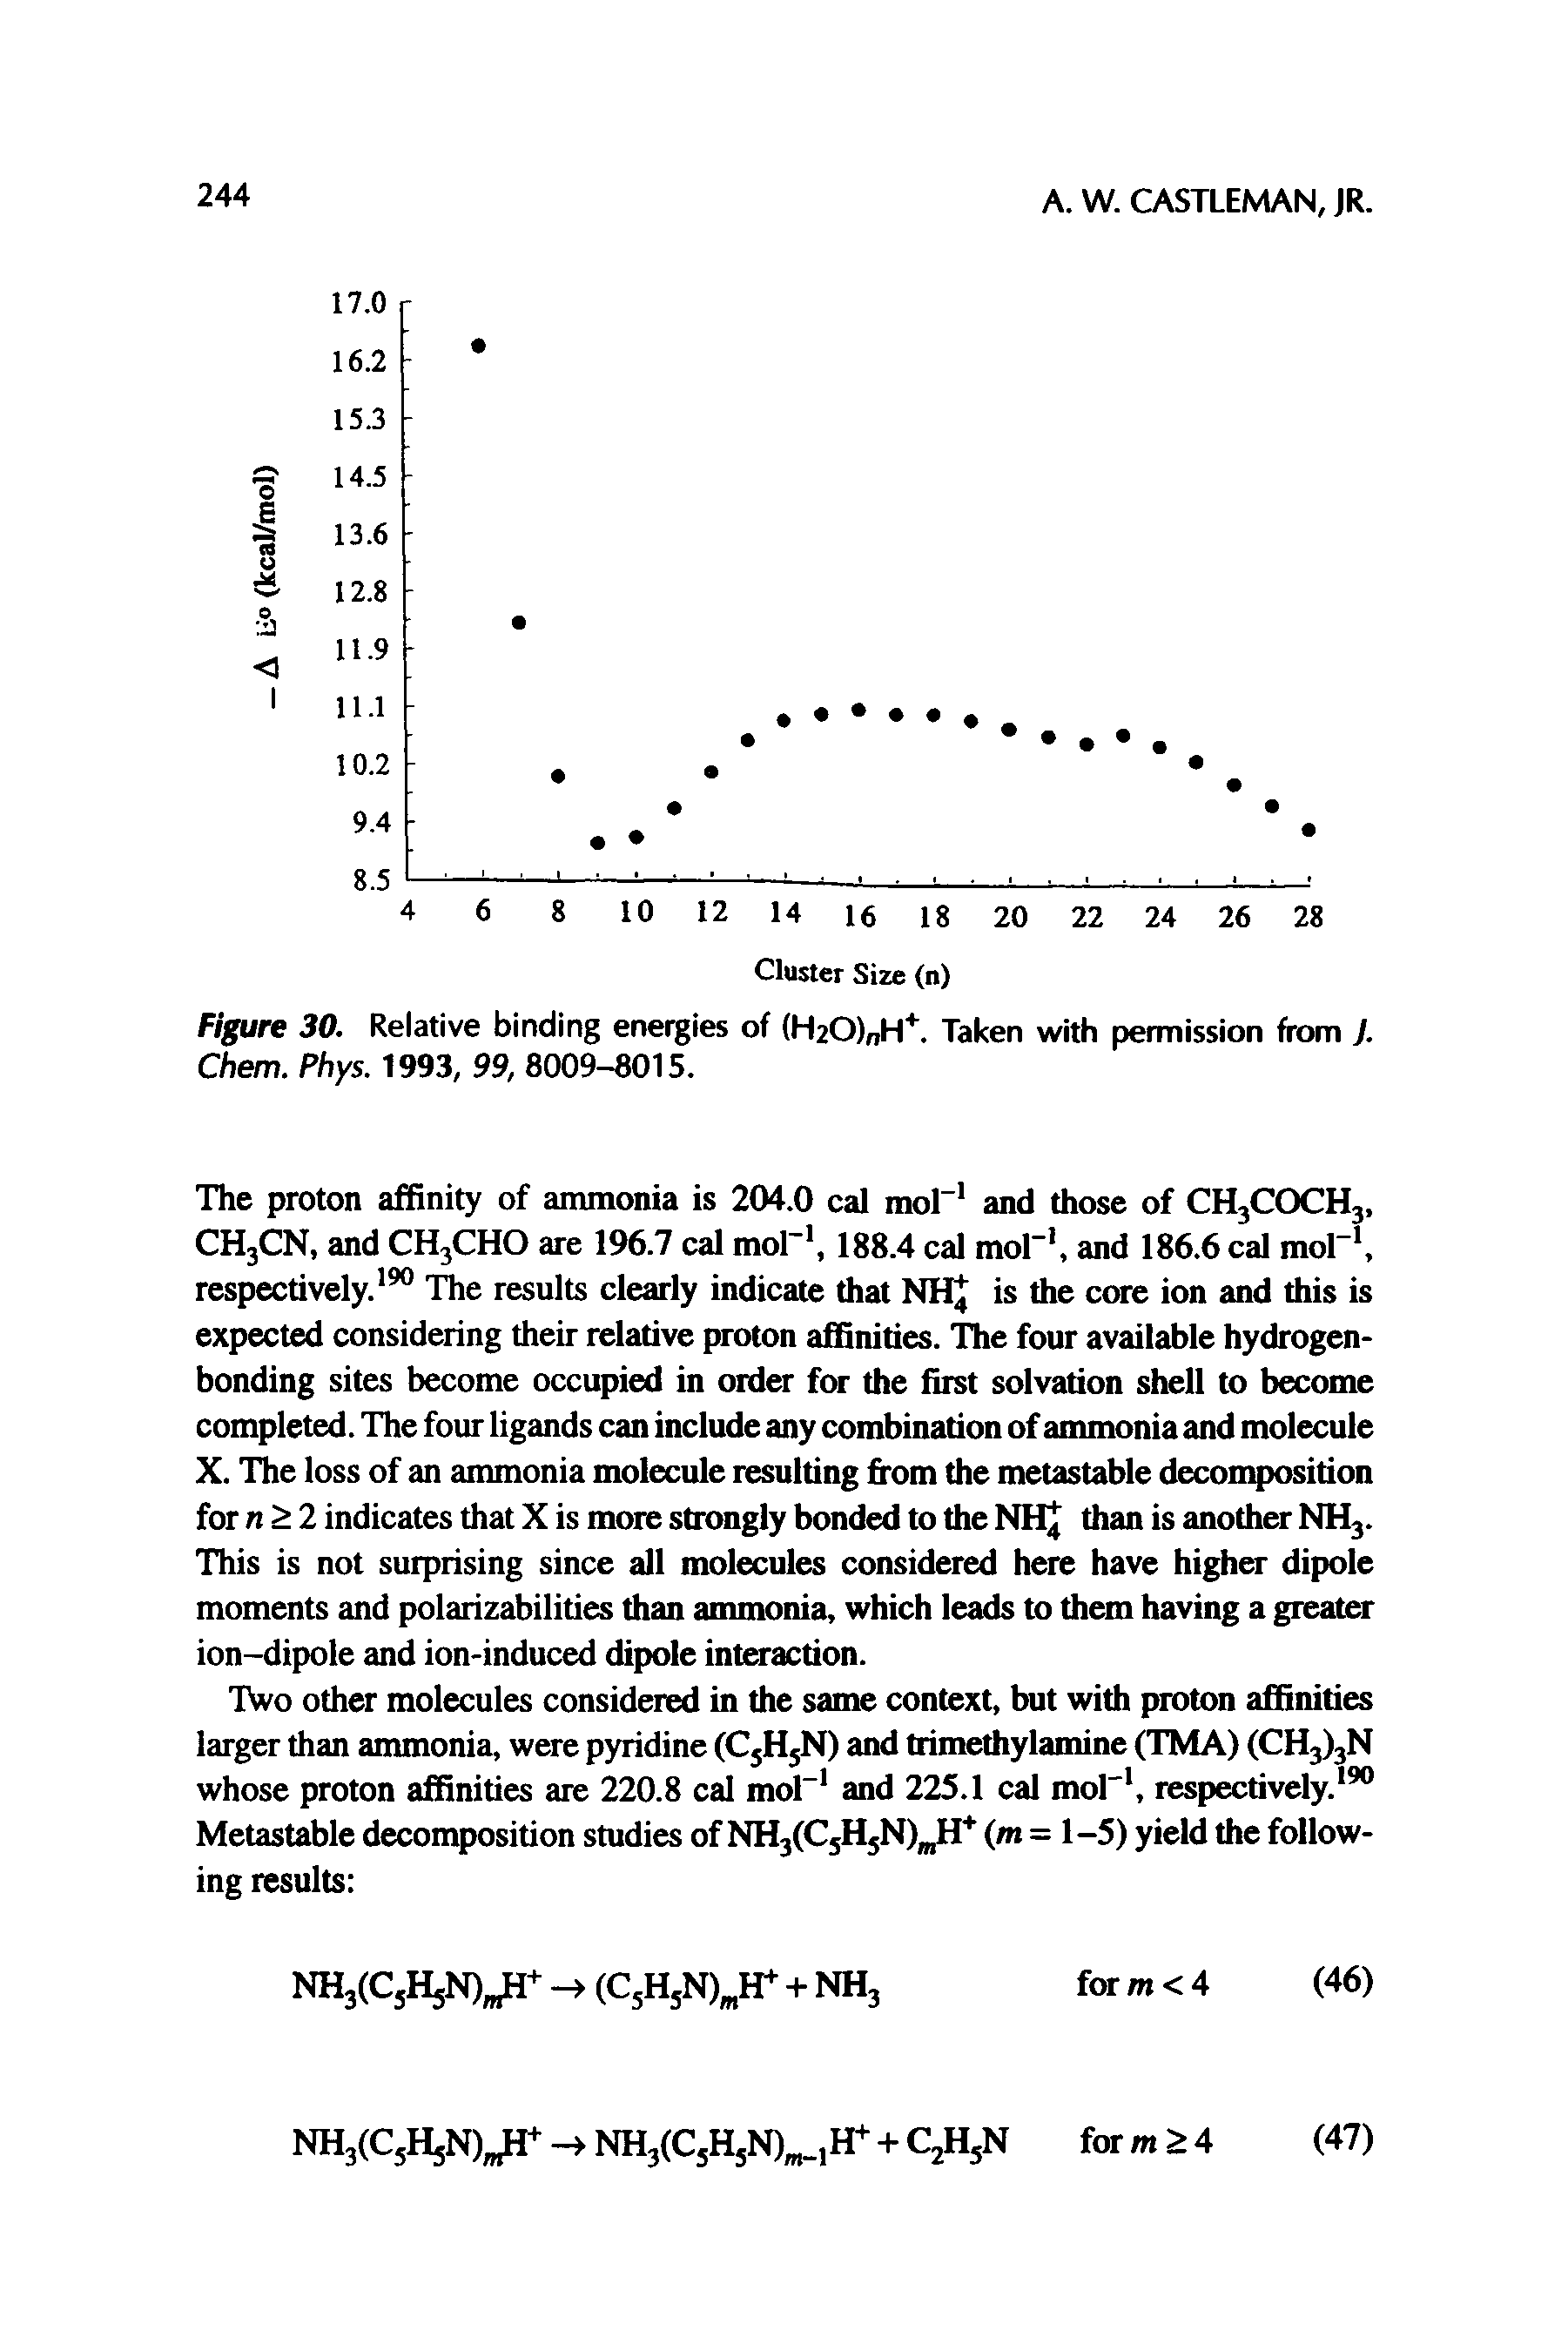 Figure 30. Relative binding energies of (H20) H+. Taken with permission from J. Chem. Phys. 1993, 99, 8009-8015.